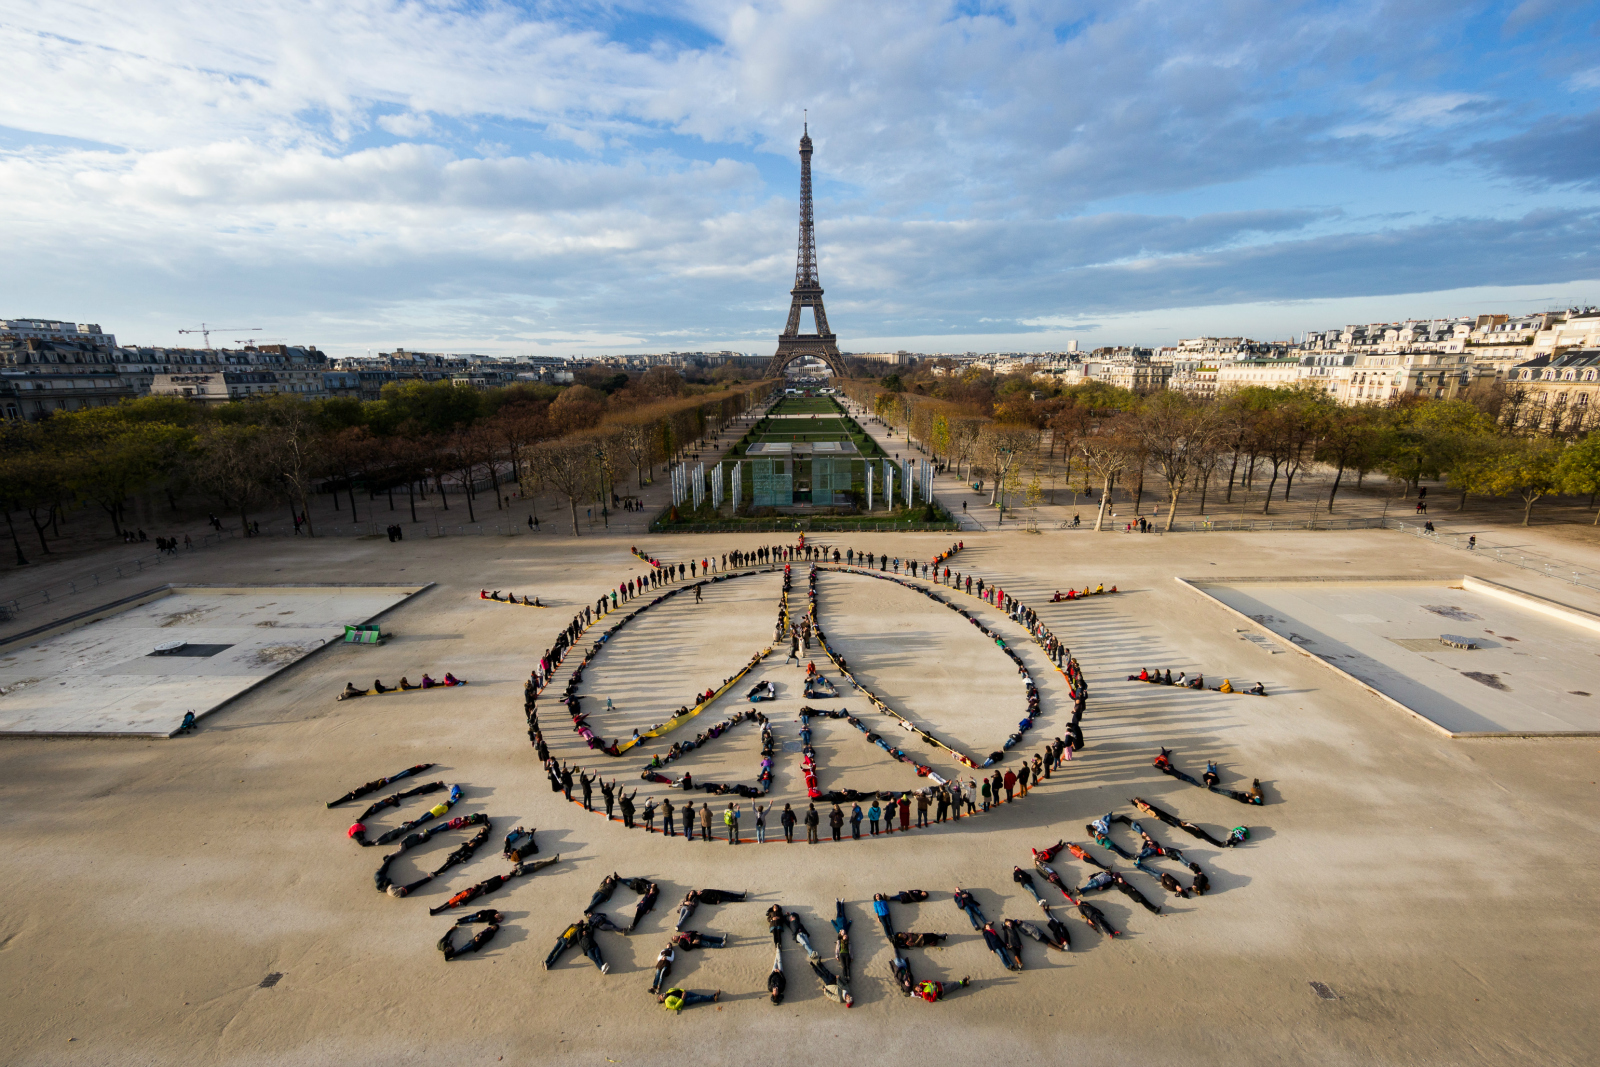 activists spelling "100% renewable" with their bodies in front of Eiffel Tower